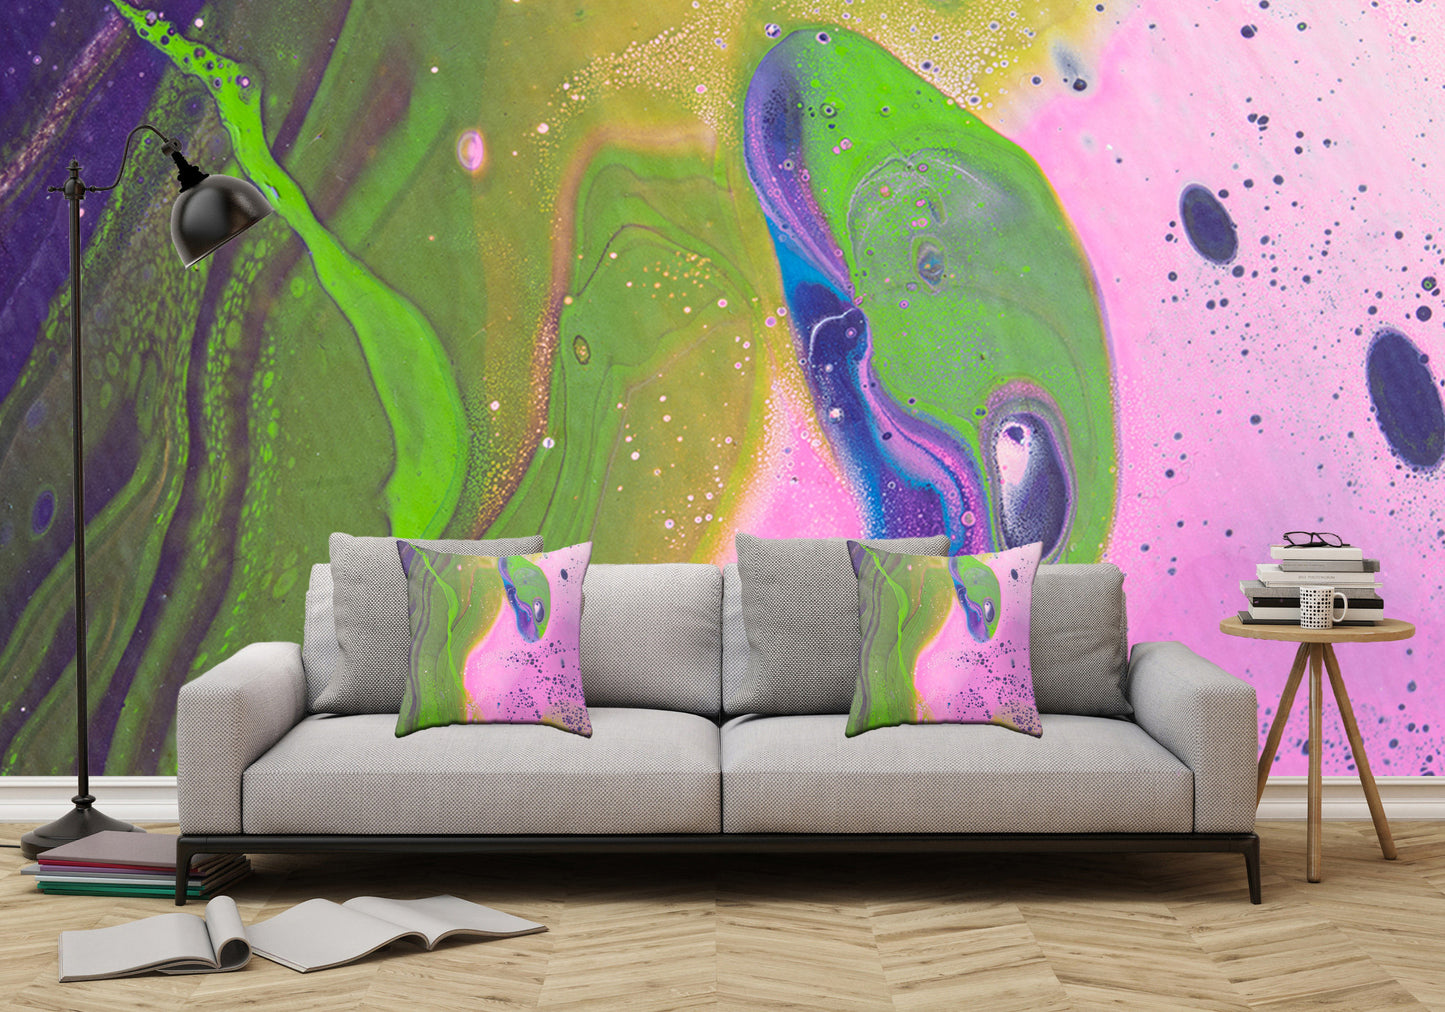 Removable Wall Mural - Wallpaper  Abstract Artwork - Fluid Art Pour 30  - PIPAFINEART